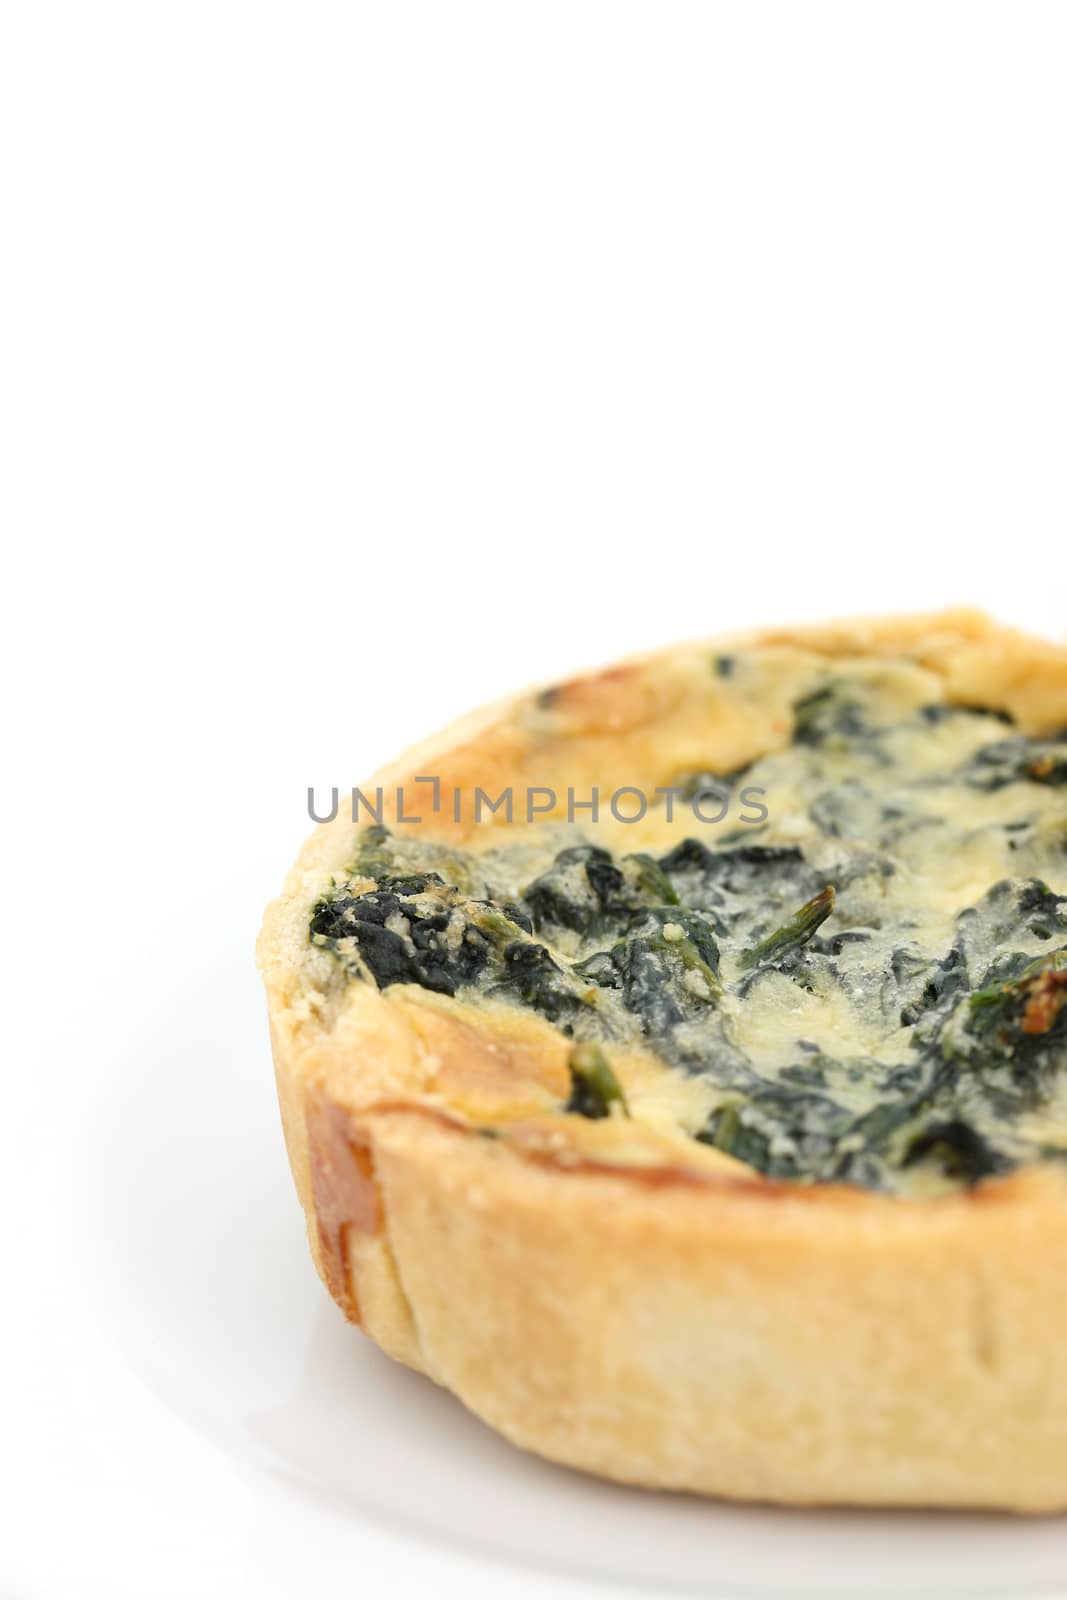 spinach quiche pie isolated on white background